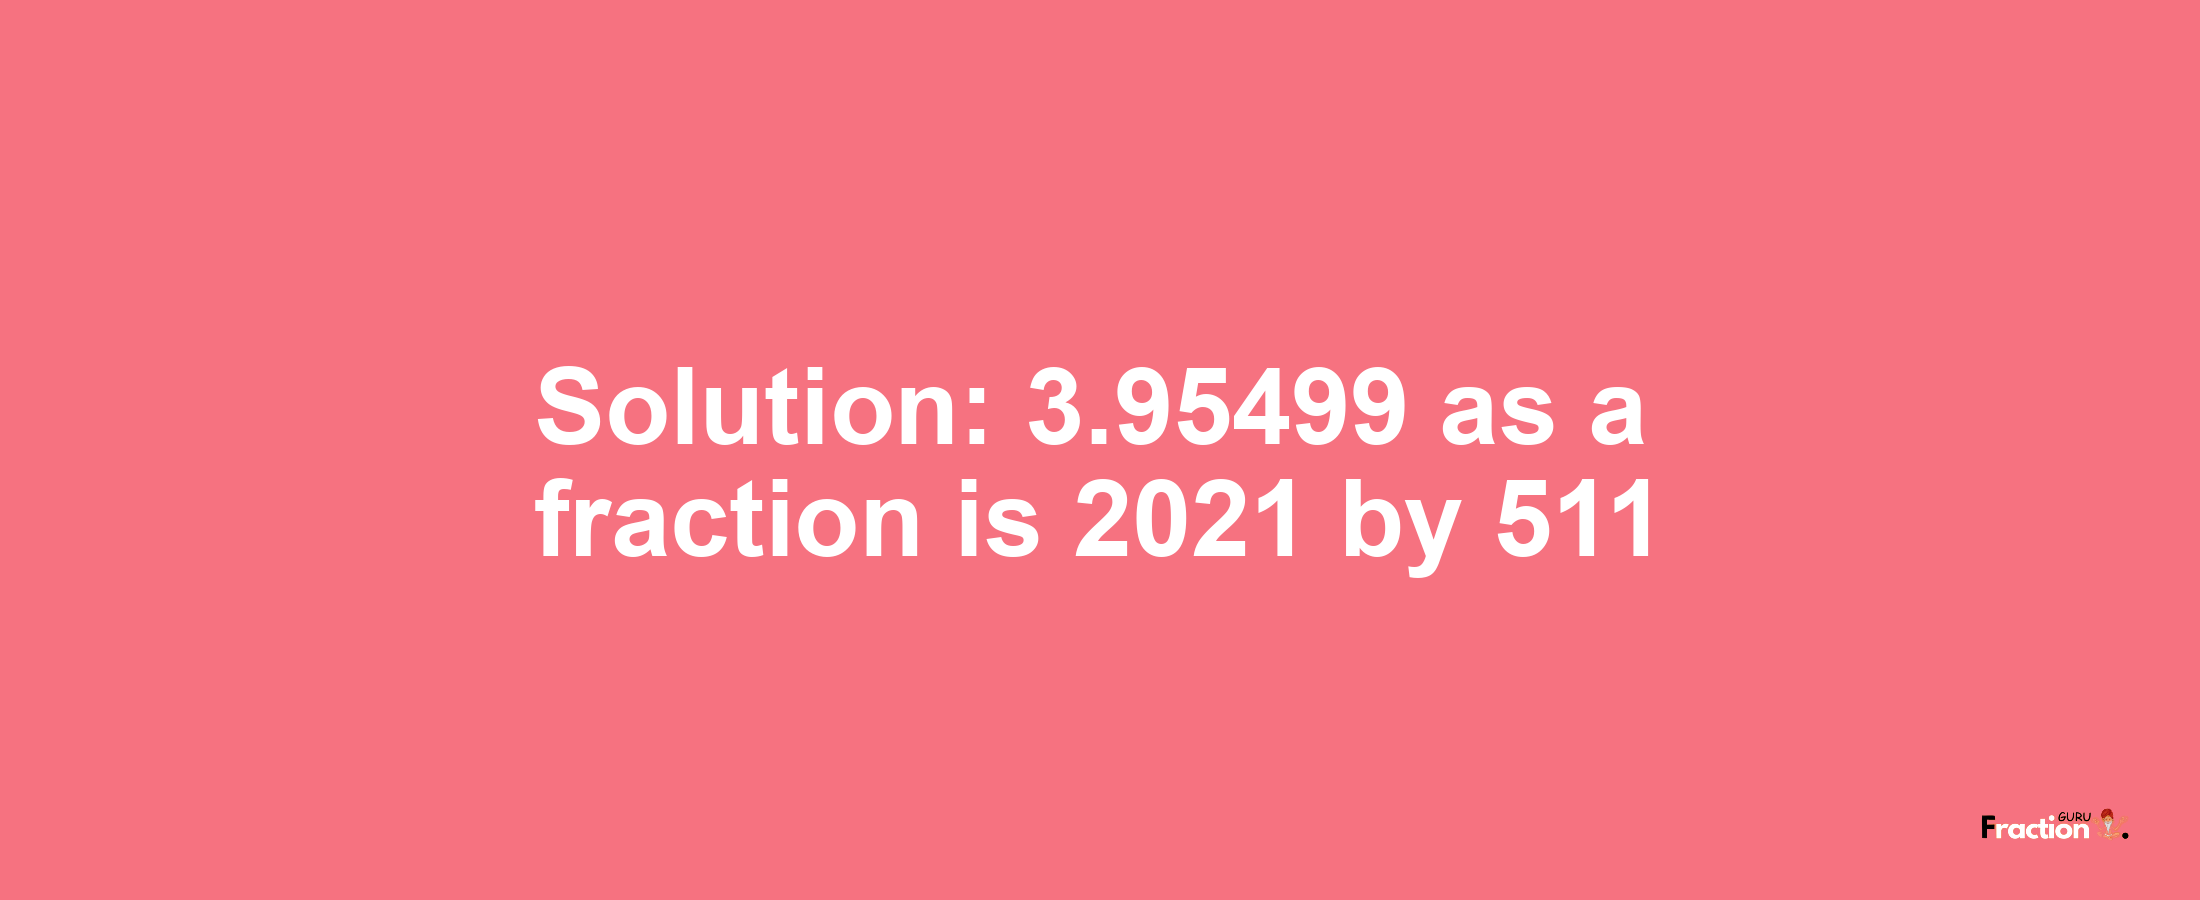 Solution:3.95499 as a fraction is 2021/511